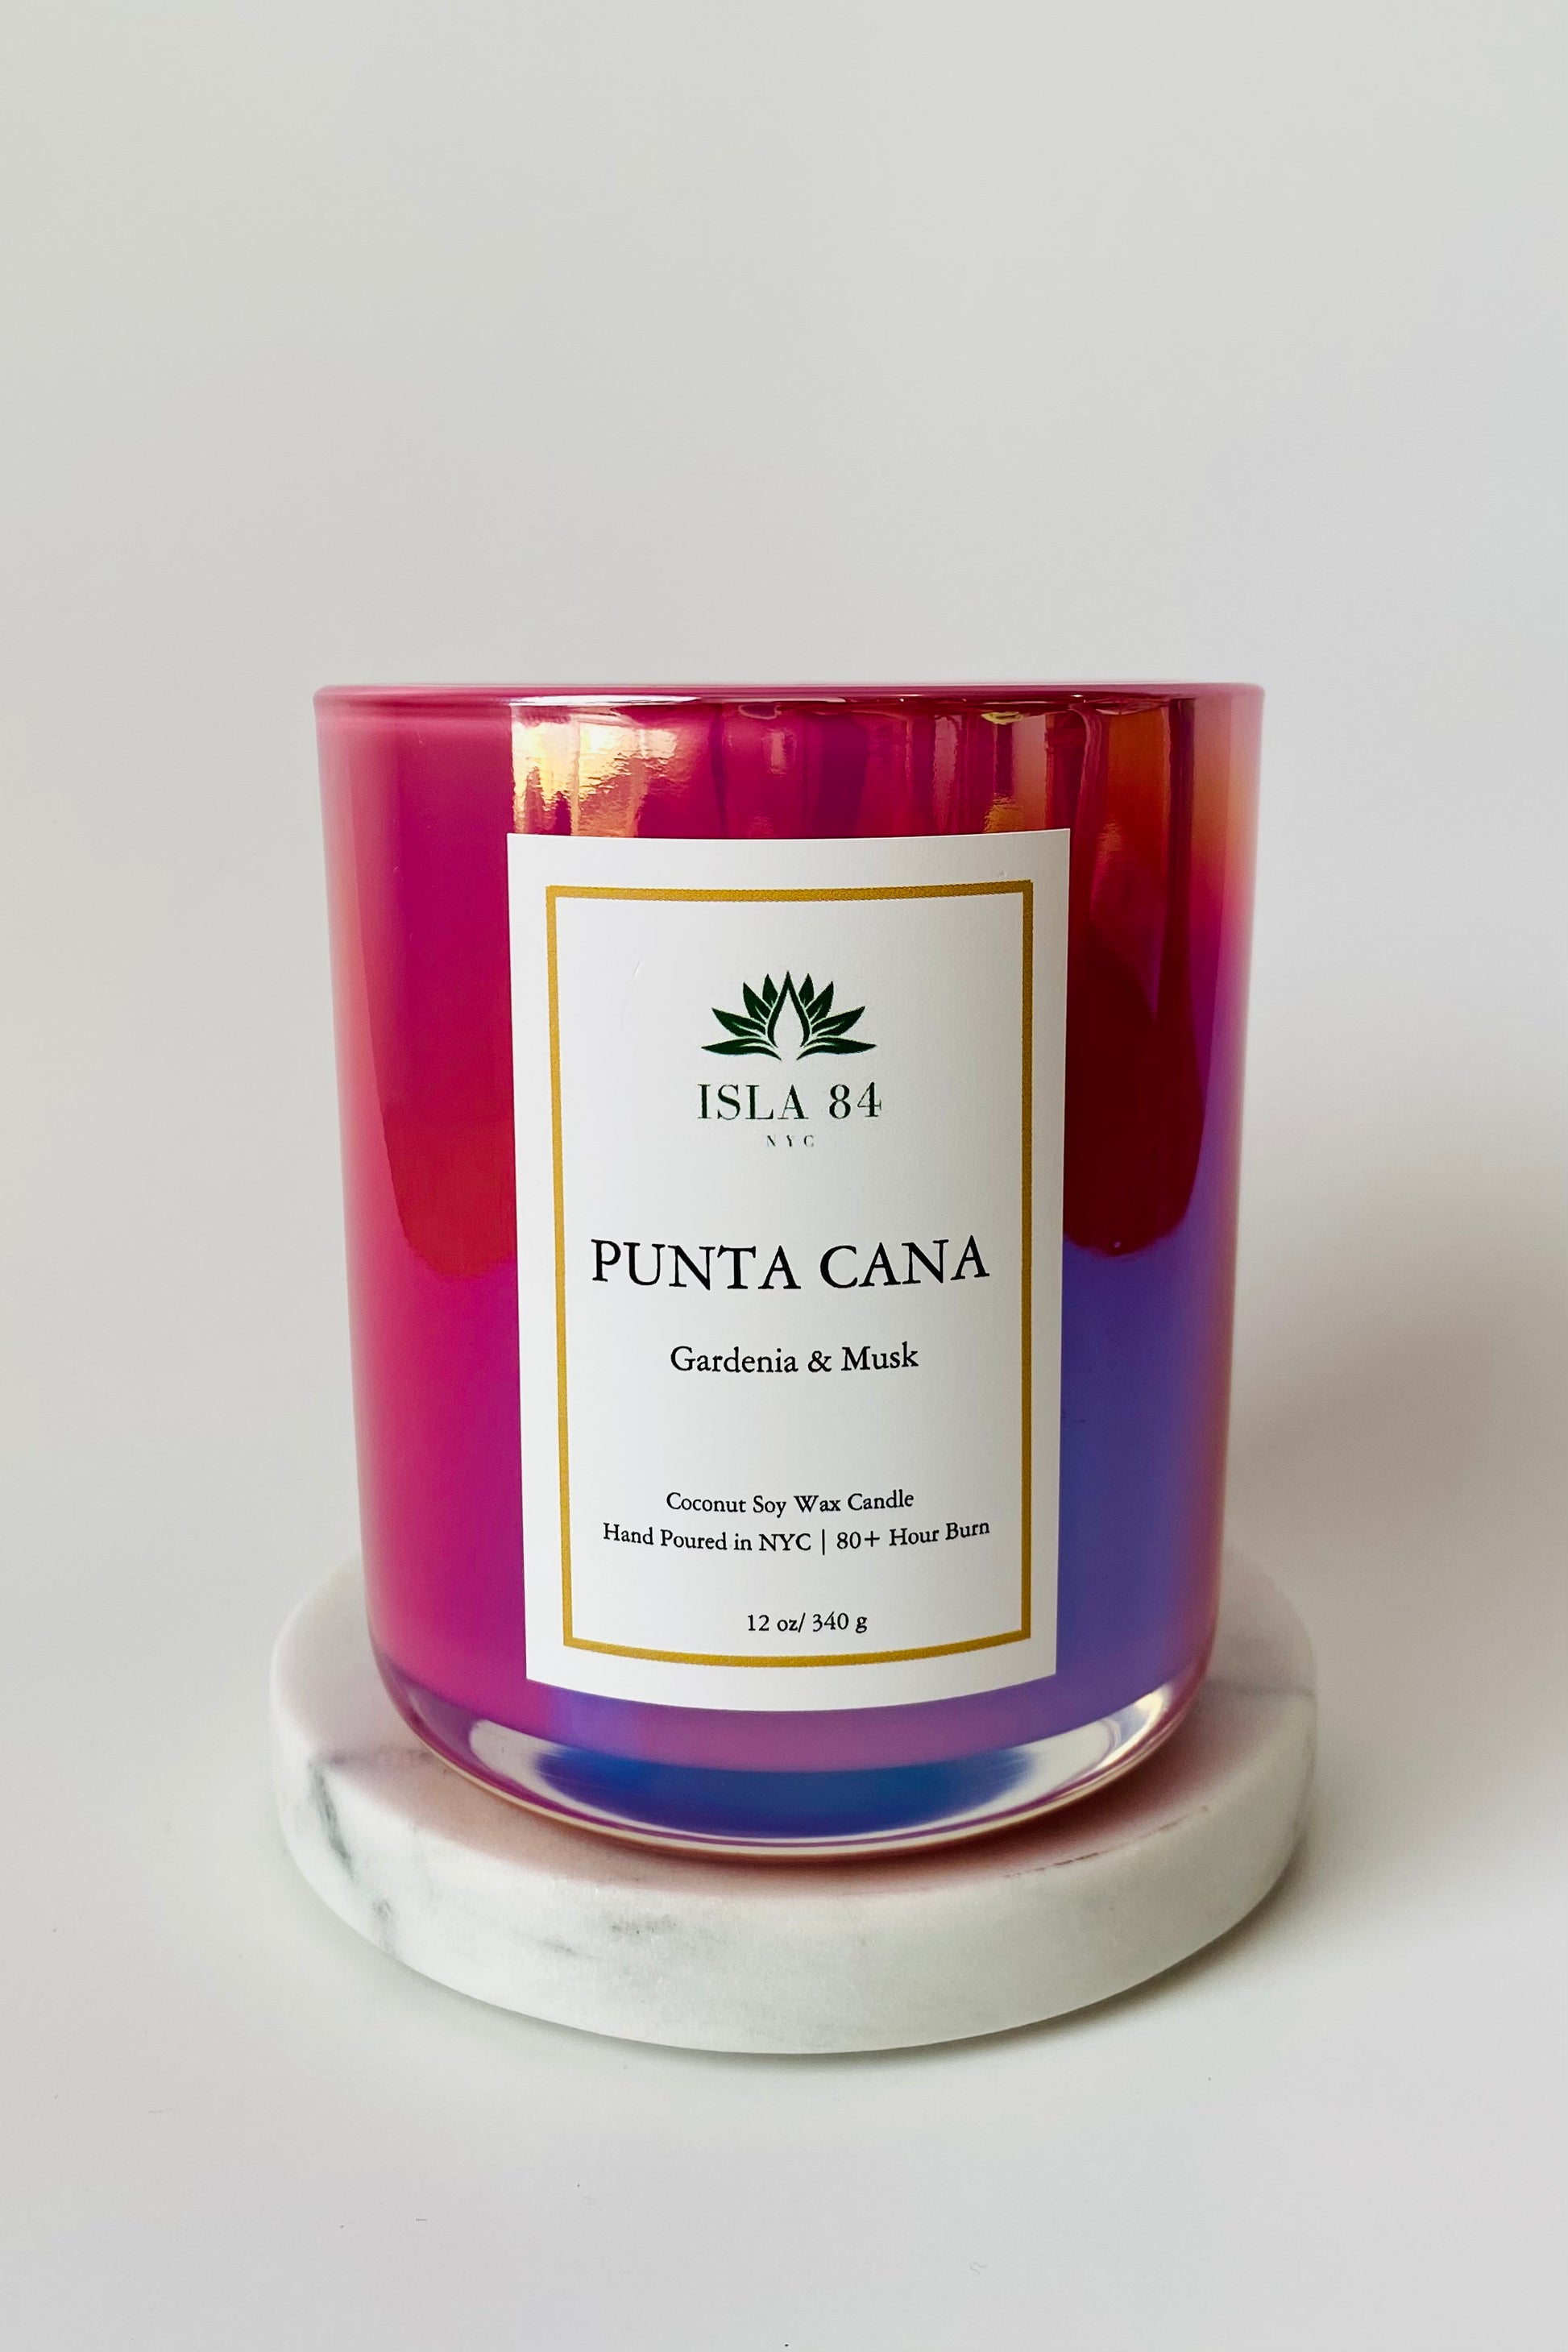 Punta Cana Signature Scented Candle; Dominican Republic Candle; Coconut Soy Wax Candle with Wood Wick